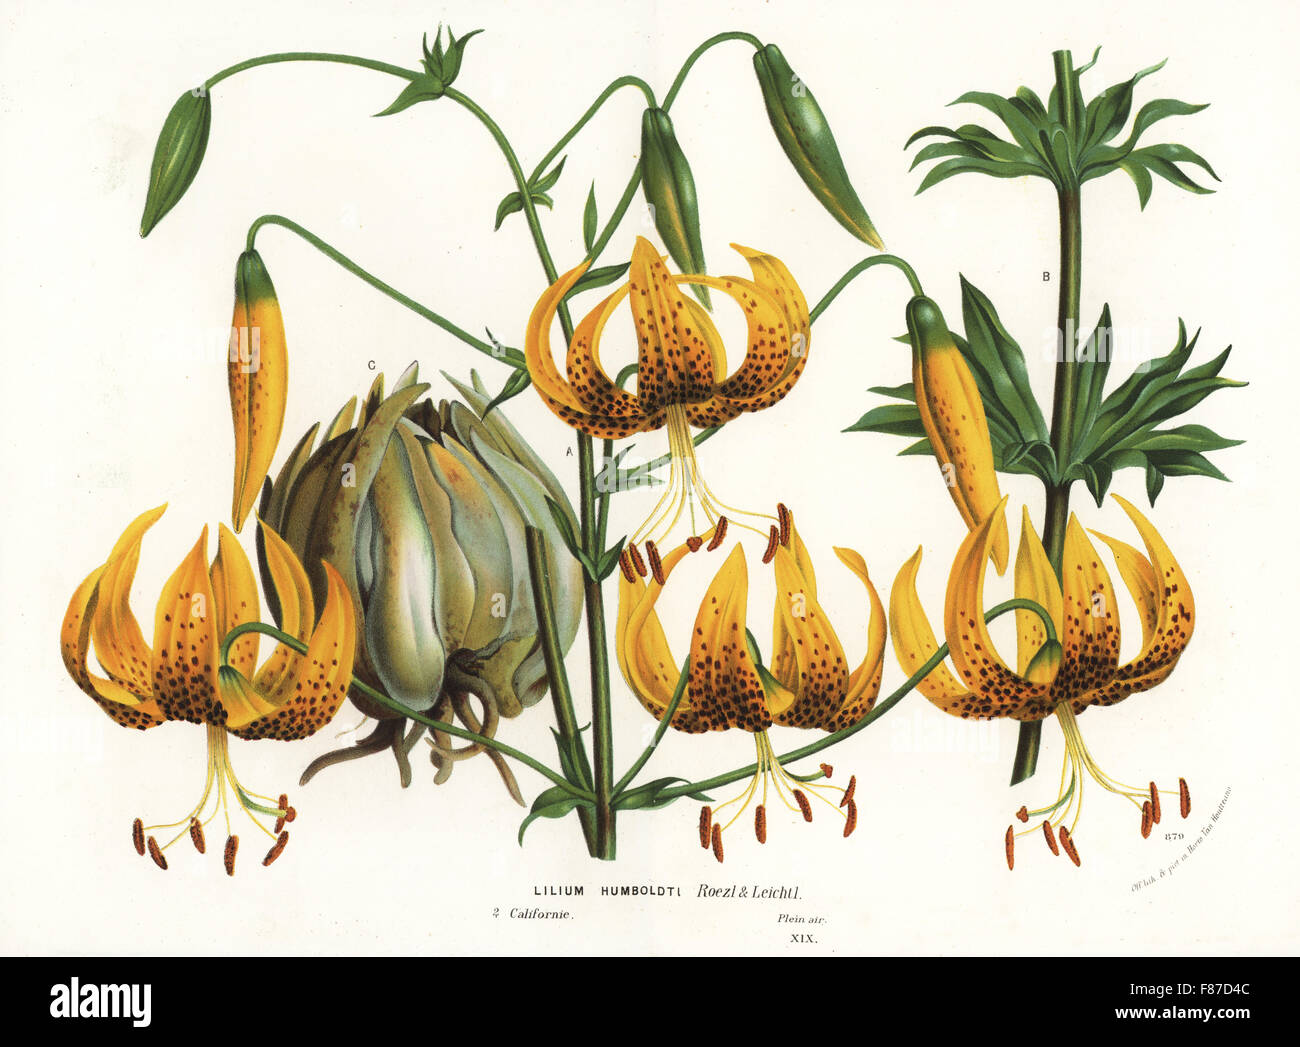 Humboldt's lily, Lilium humboldtii. Handcoloured lithograph from Louis van Houtte and Charles Lemaire's Flowers of the Gardens and Hothouses of Europe, Flore des Serres et des Jardins de l'Europe, Ghent, Belgium, 1870. Stock Photo